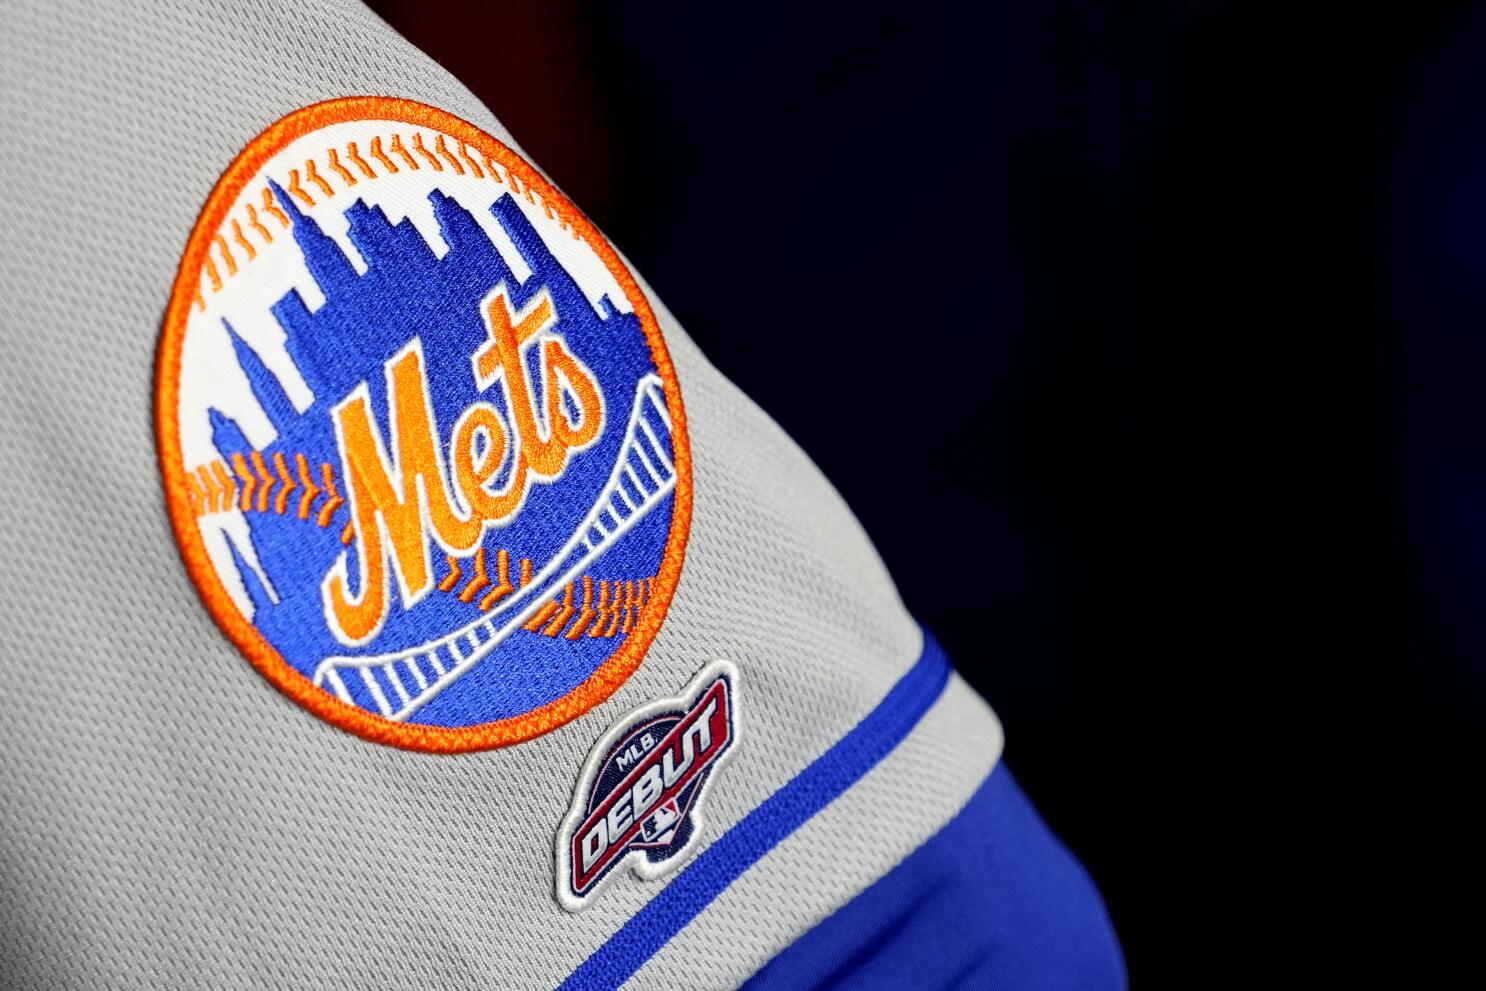 MLB debut players will have special patches on their jerseys - The